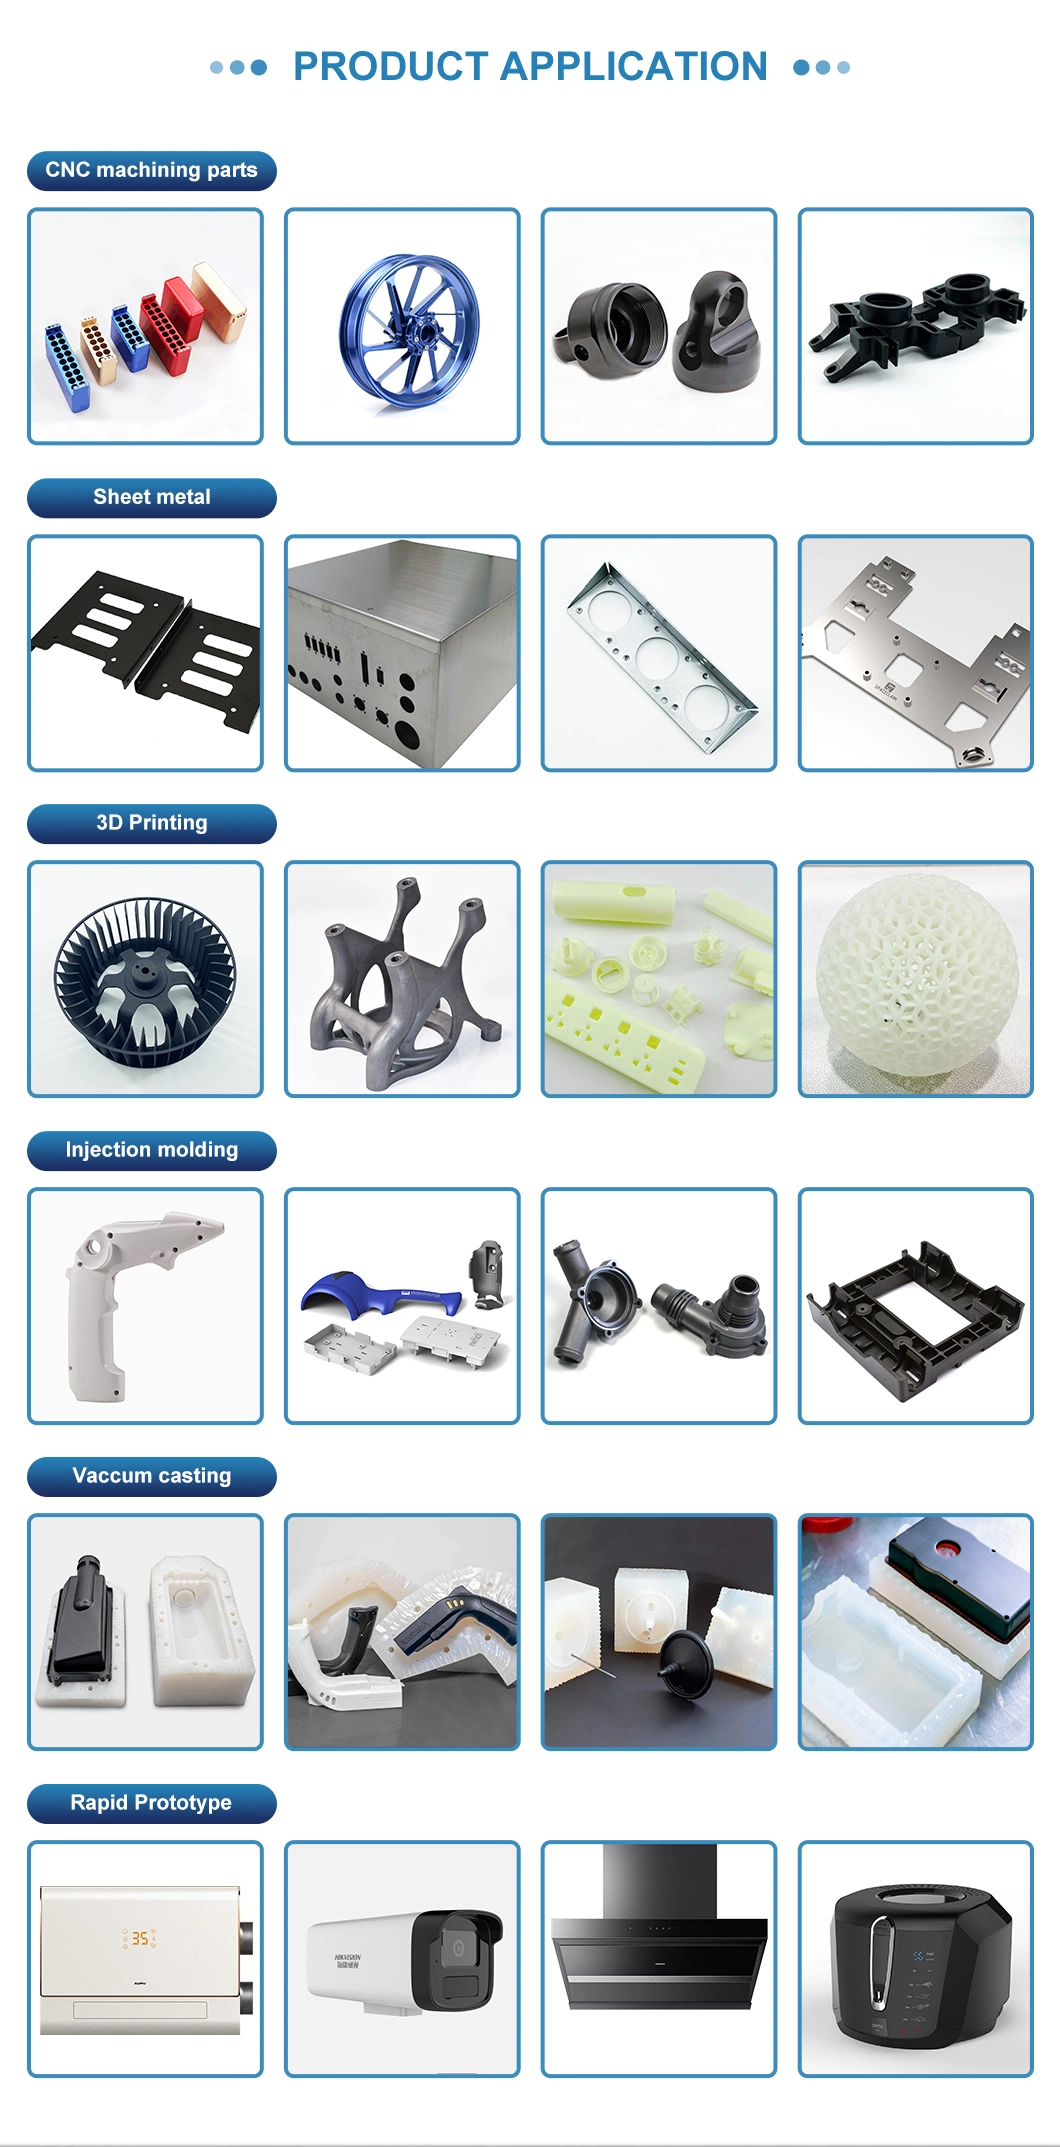 Zhejiang Factory Specializes in Small Batch Customized Processing of Plastic Injection Molding Plastic Products Vacuum Casting